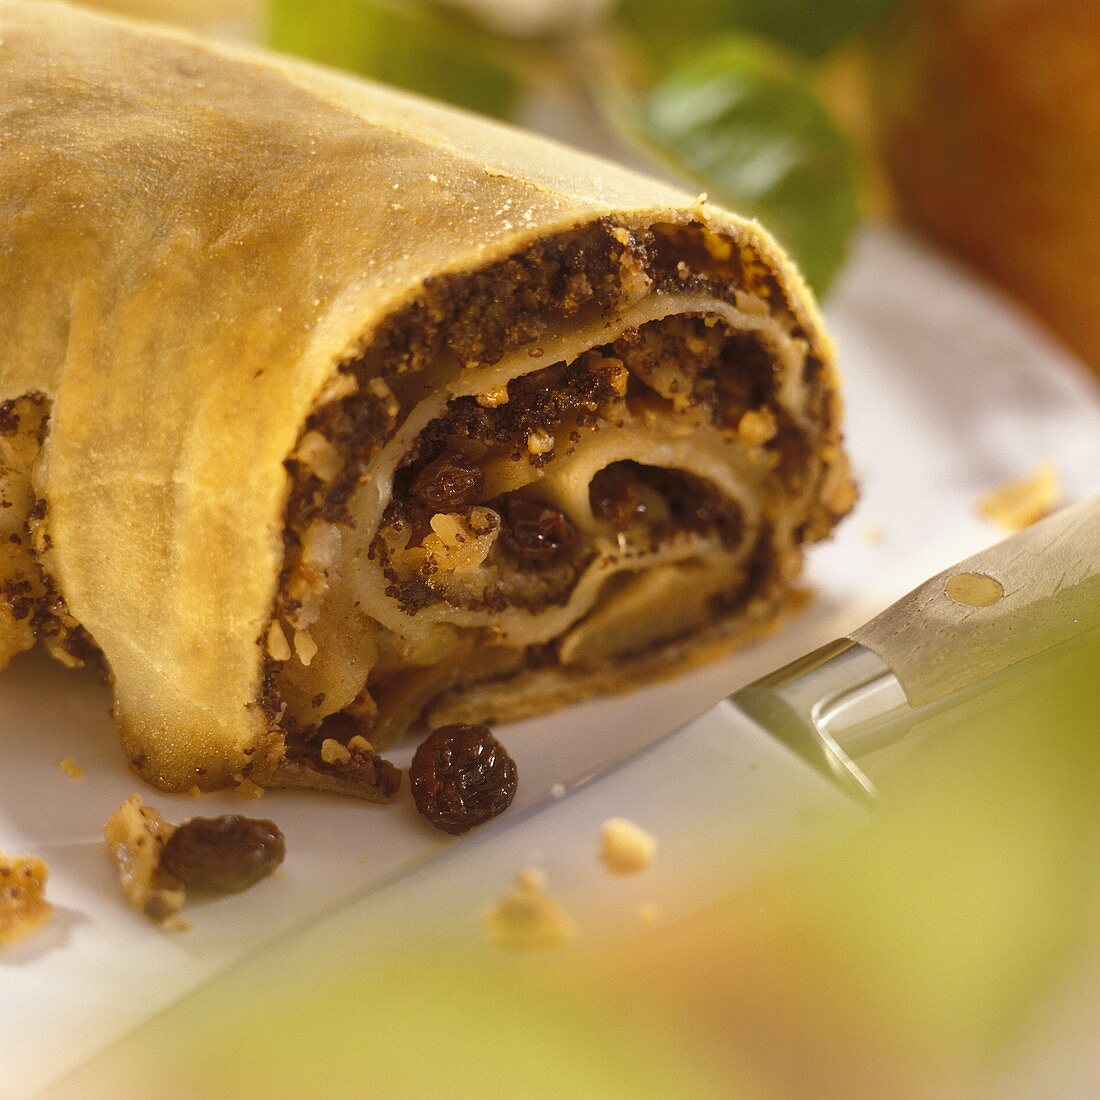 Apple and poppy seed strudel with raisins